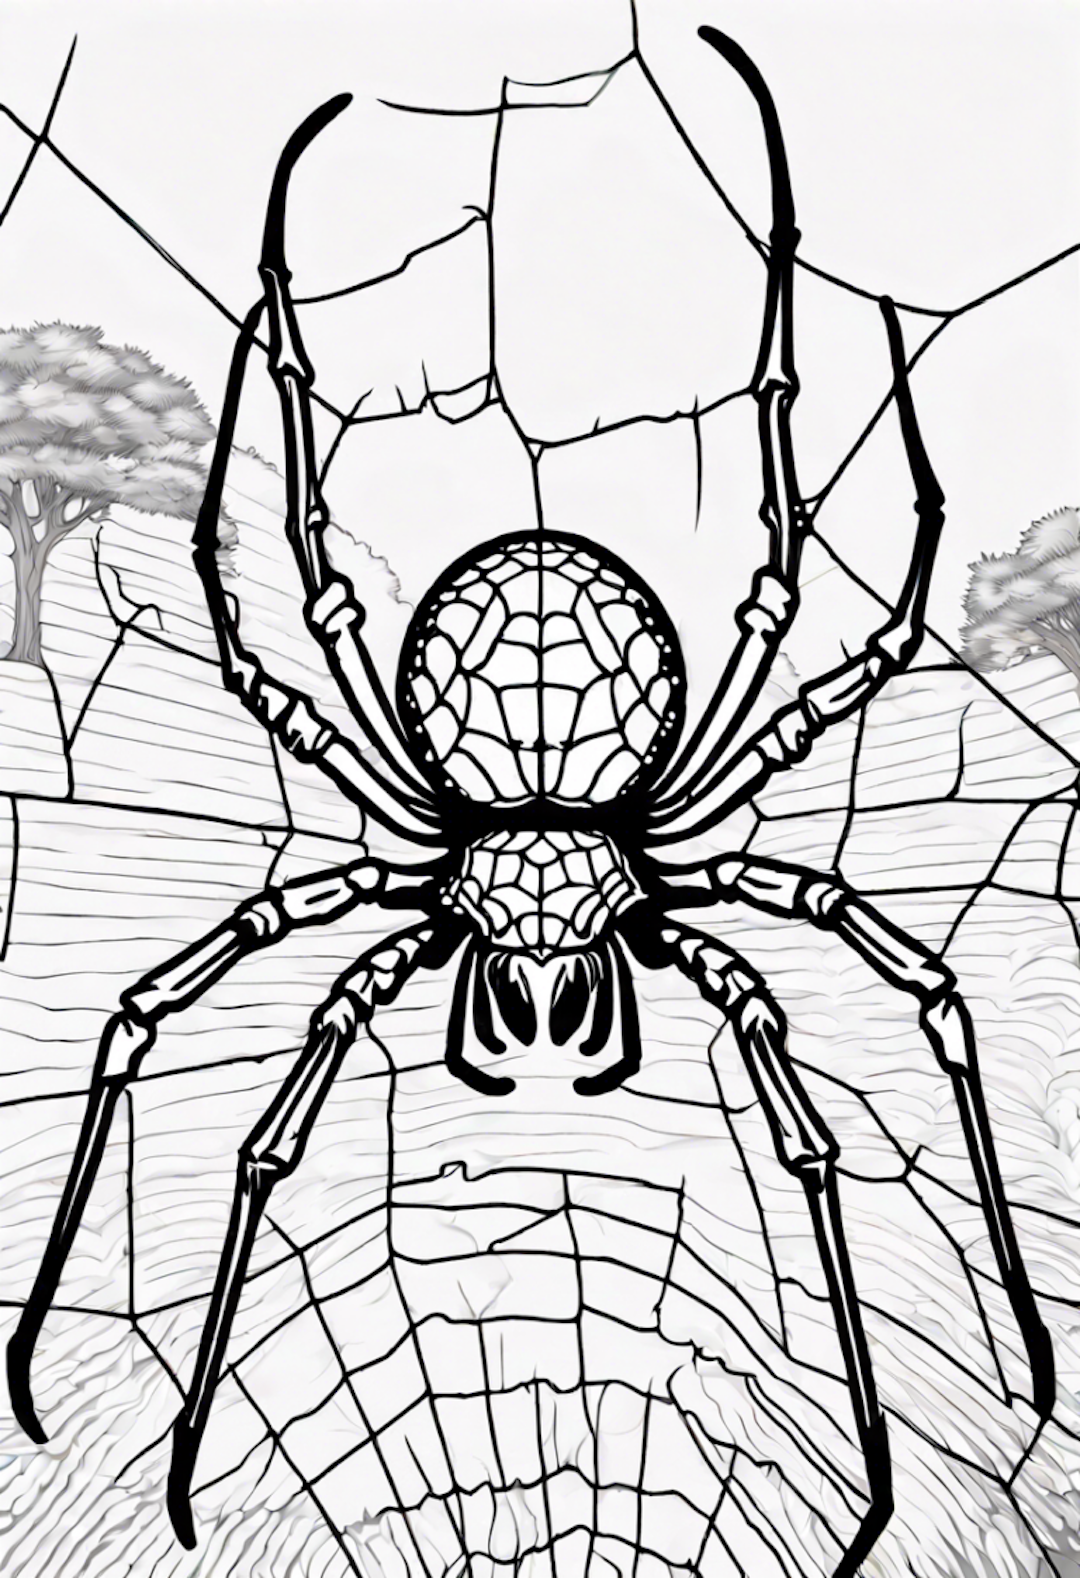 Orb Weaver Spider coloring pages